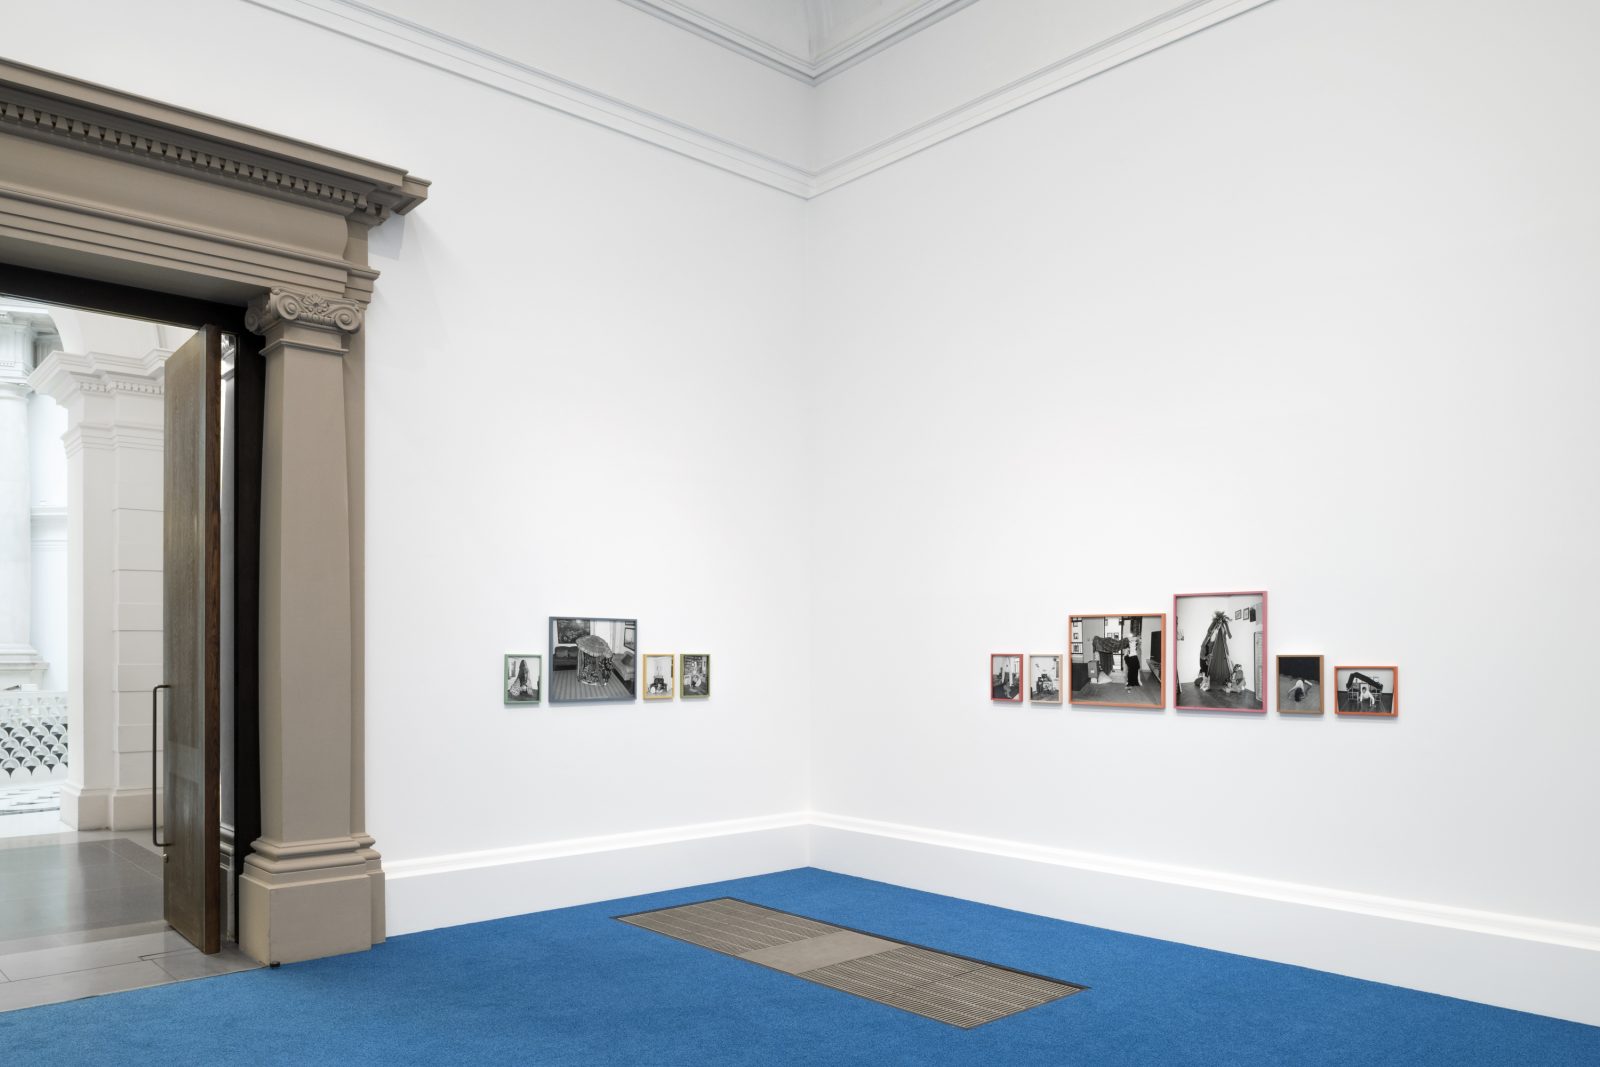 Installation view of Art Now: Joanna Piotrowska: All Our False Devices at Tate Britain, 2019. Photo: Tate Photography (Matt Greenwood)